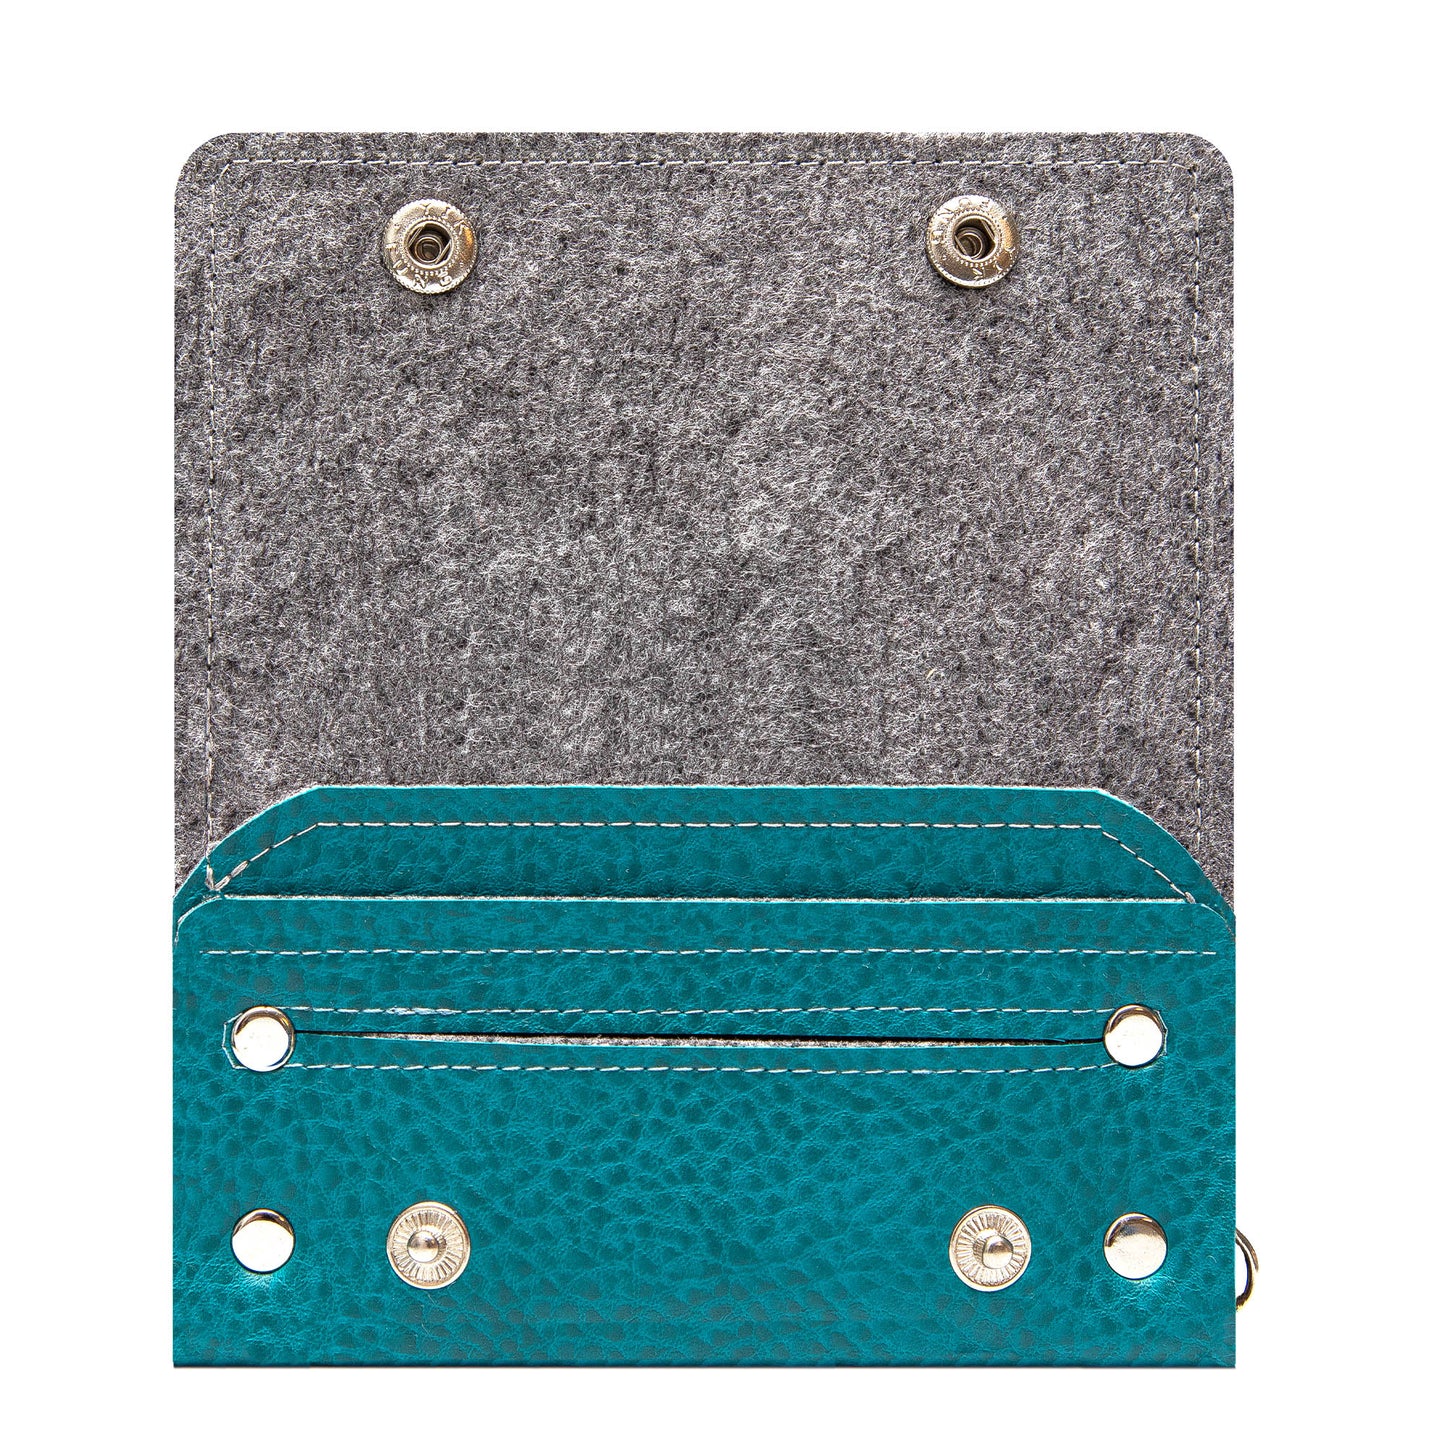 Handcrafted Biker Wallet with Detachable Chain - Cruelty-Free and Fashionably Functional - Teal Faux Leather